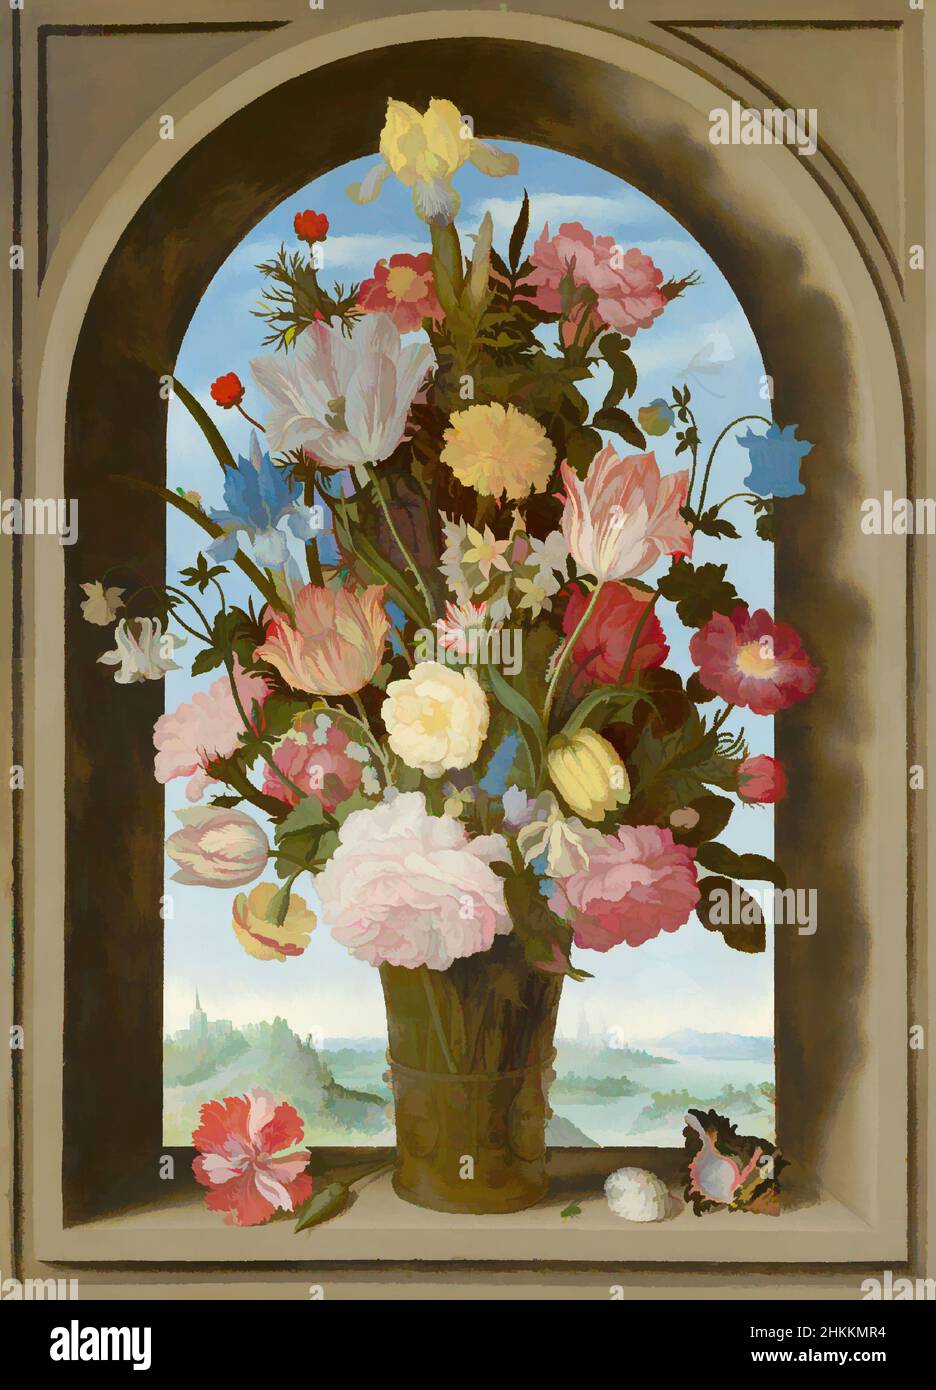 Art inspired by Vase of flowers in a window, Ambrosius Bosschaert de Oude, c. 1618, Classic works modernized by Artotop with a splash of modernity. Shapes, color and value, eye-catching visual impact on art. Emotions through freedom of artworks in a contemporary way. A timeless message pursuing a wildly creative new direction. Artists turning to the digital medium and creating the Artotop NFT Stock Photo